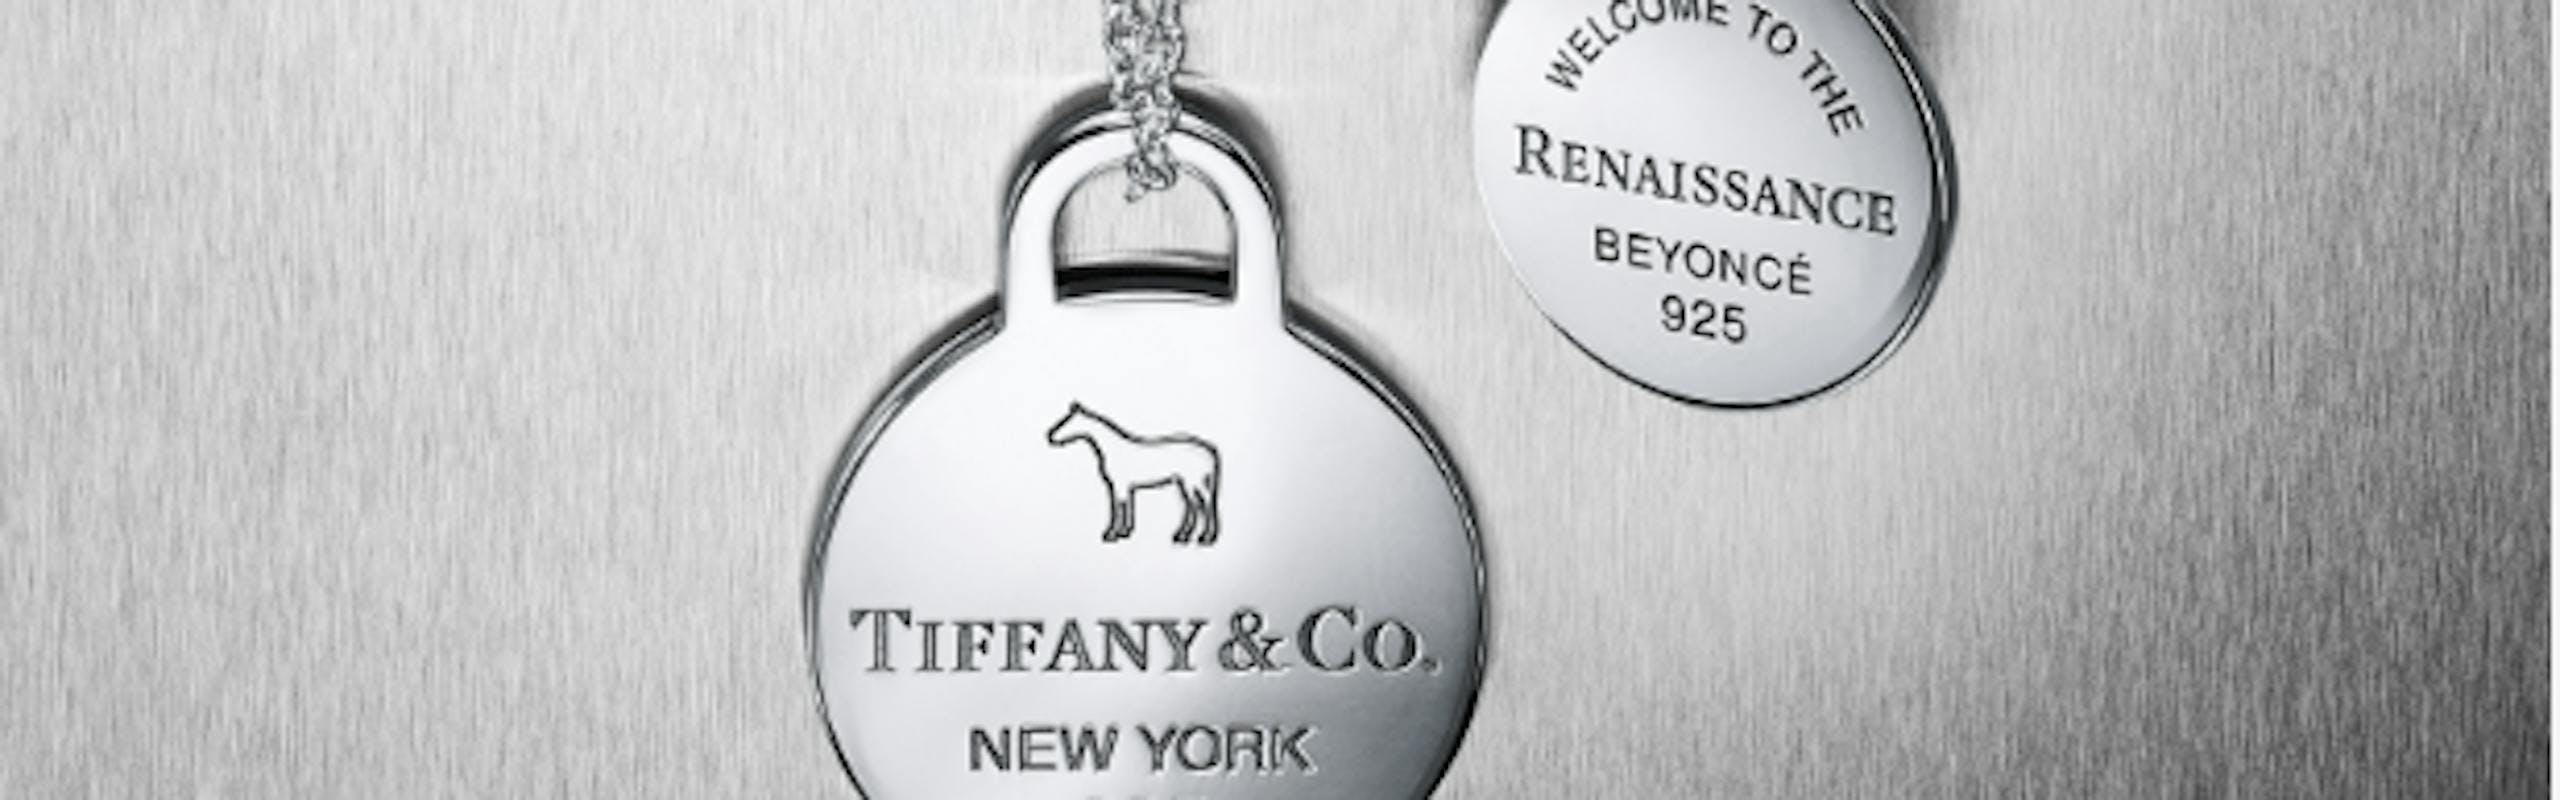 Return to Tiffany x Beyoncé Capsule Collection Styles